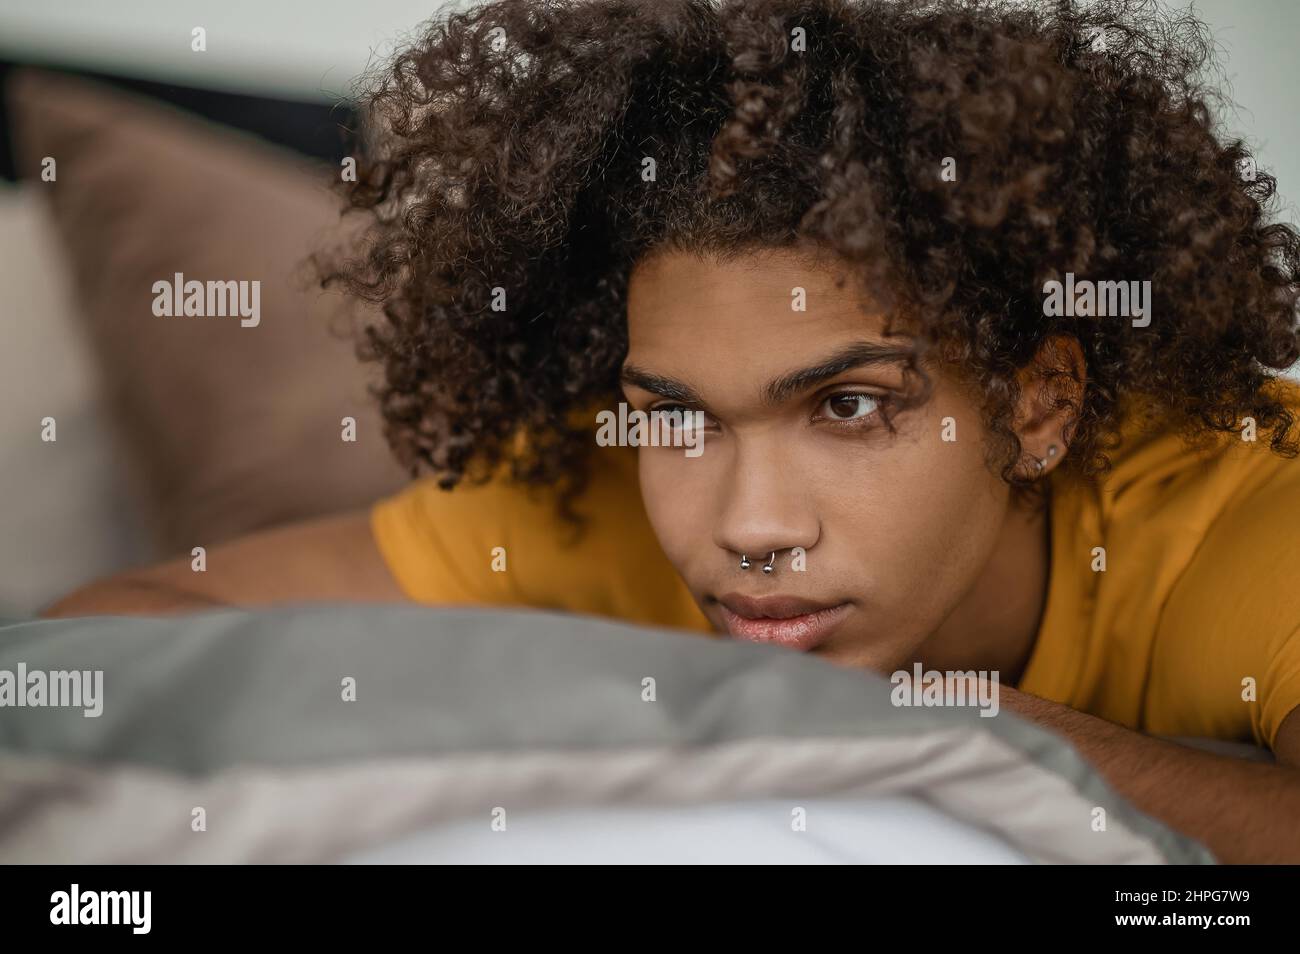 Waist up of a young mulatto with curly hair Stock Photo